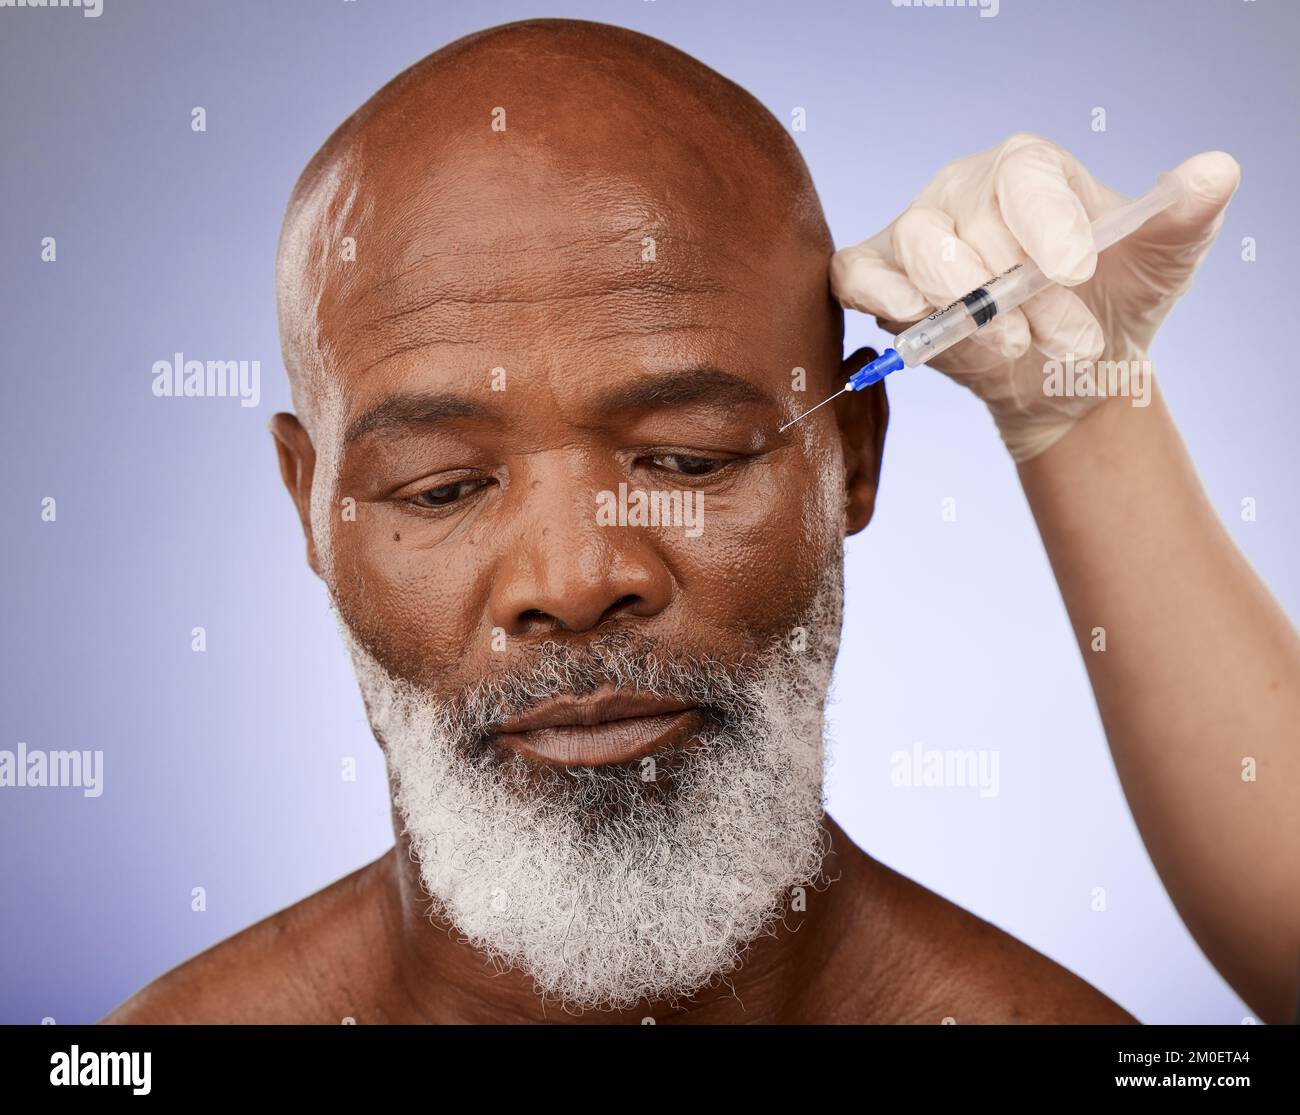 Hand, face and botox with a senior black man getting a syringe injection in studio on a purple background. Plastic surgery, anti aging and treatment Stock Photo